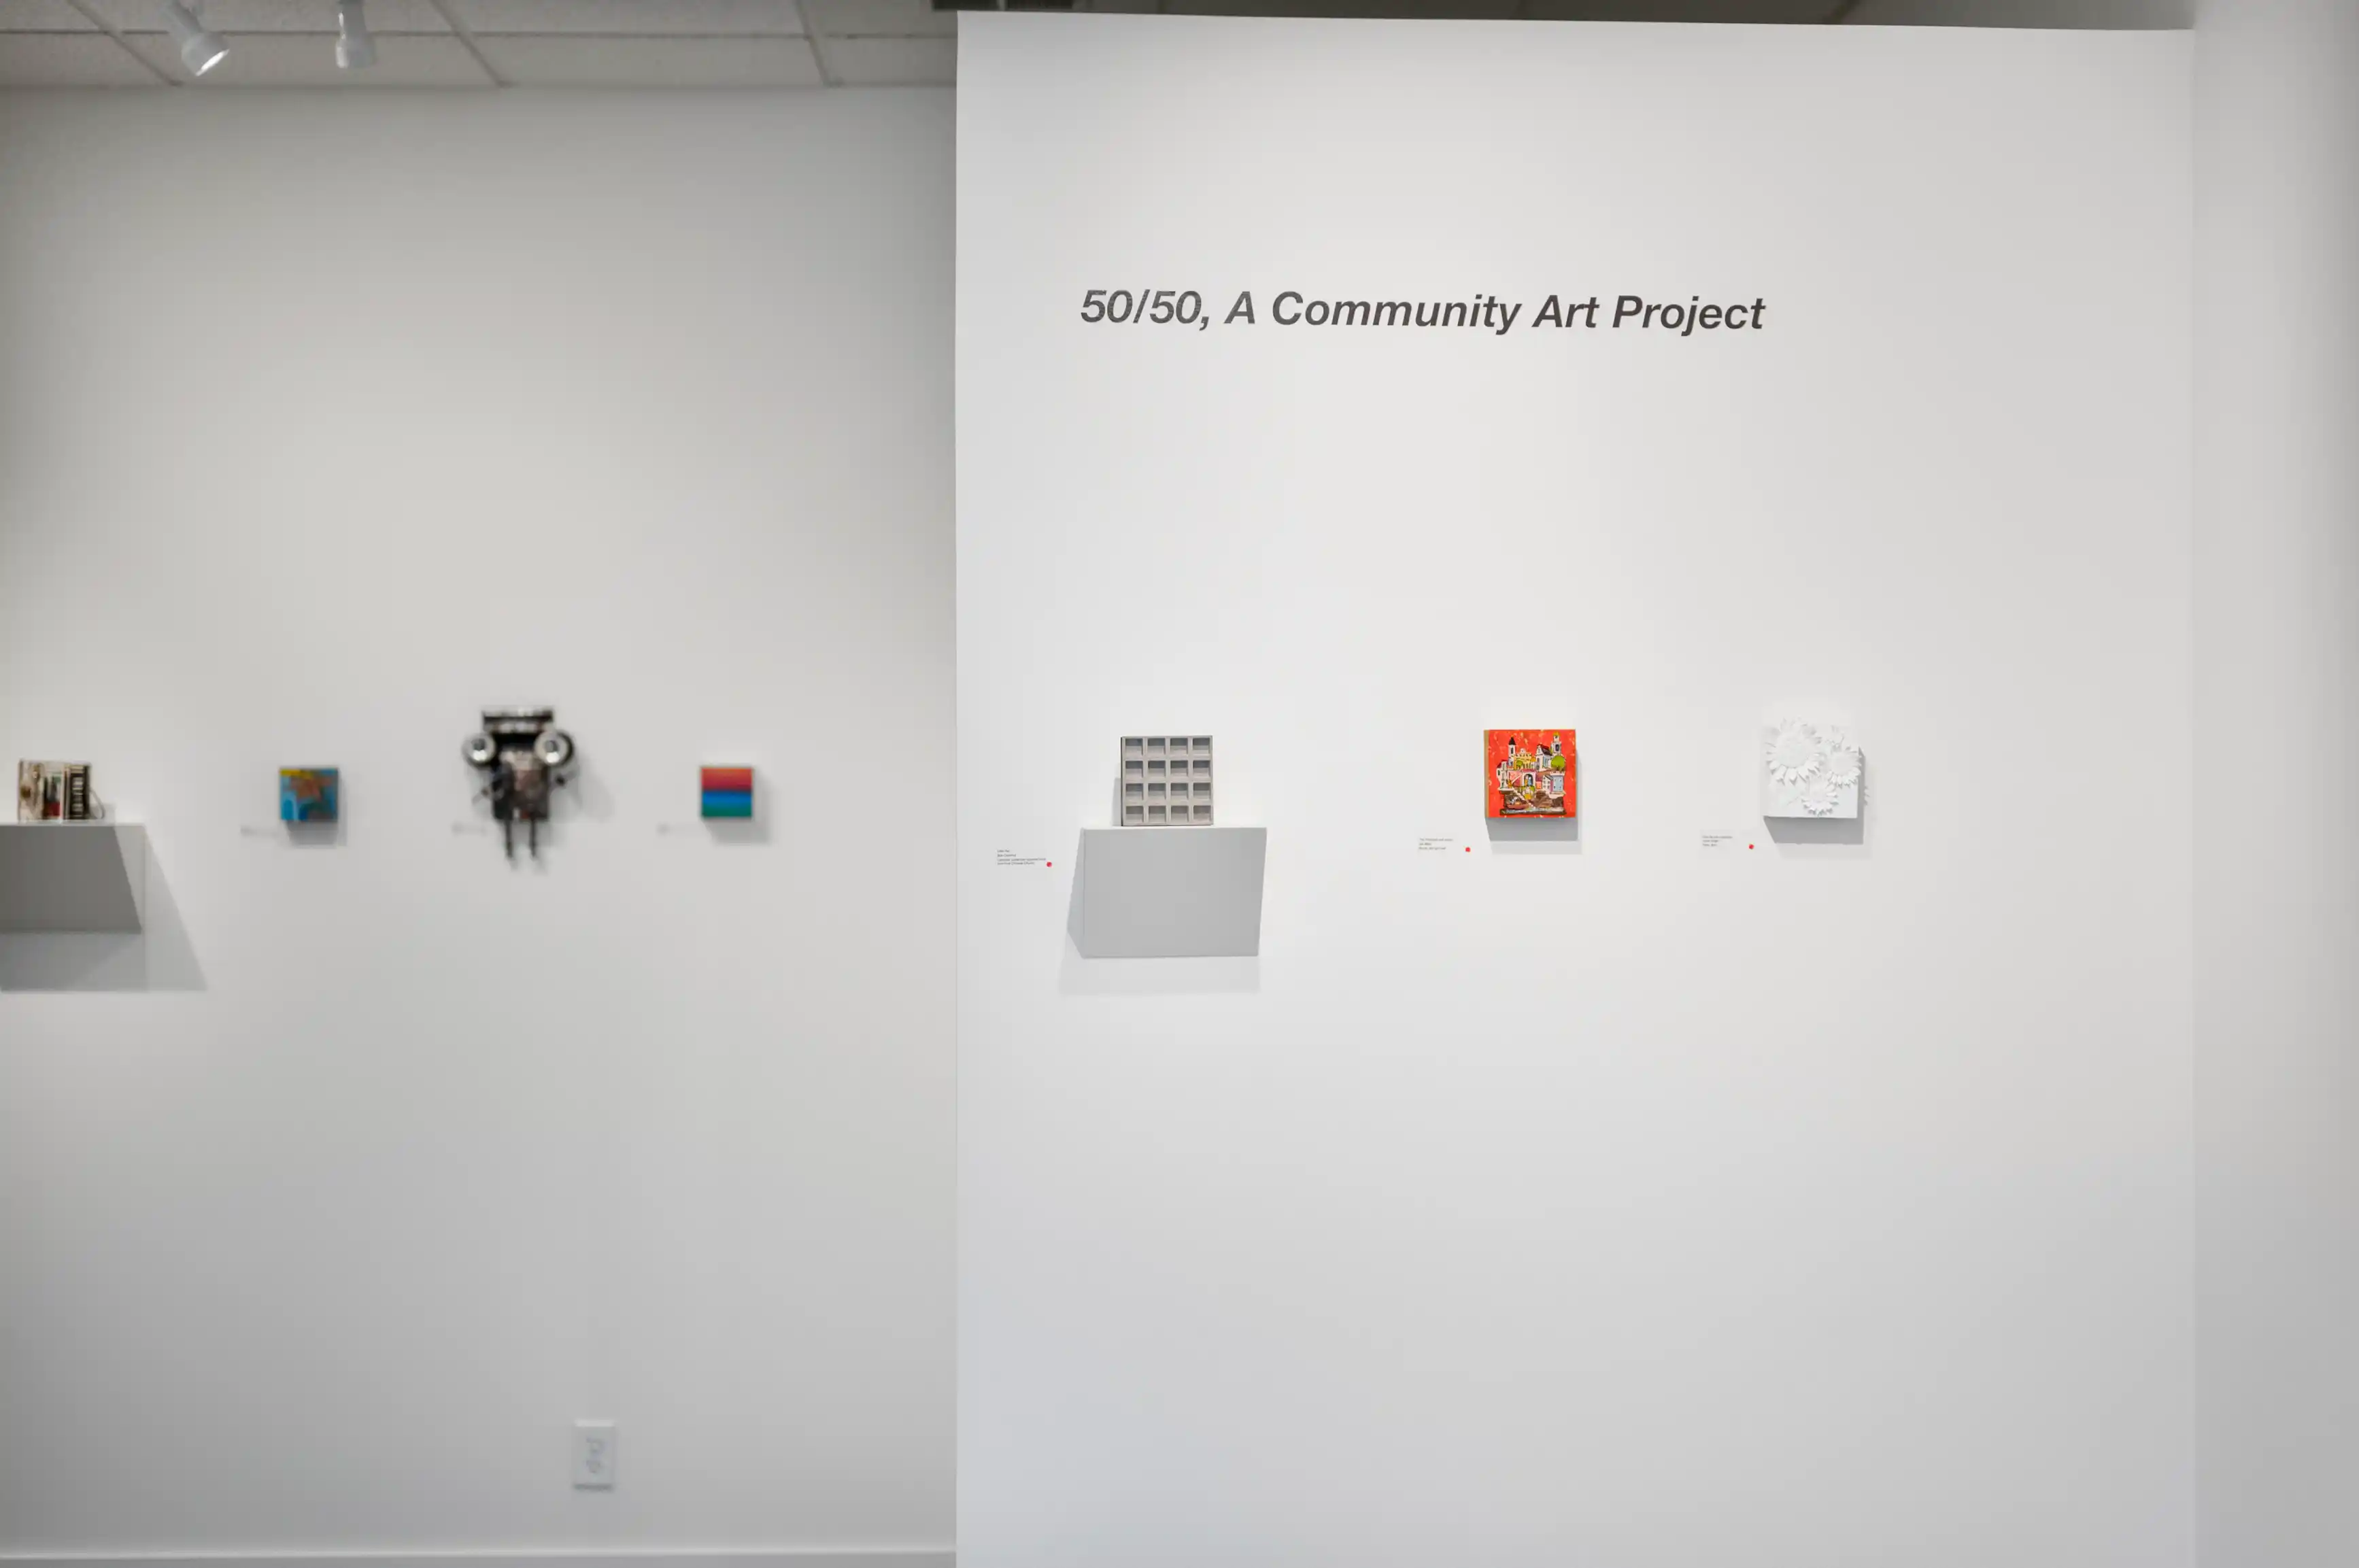 Art gallery interior showing a wall with various artworks and a title "50/50, A Community Art Project".